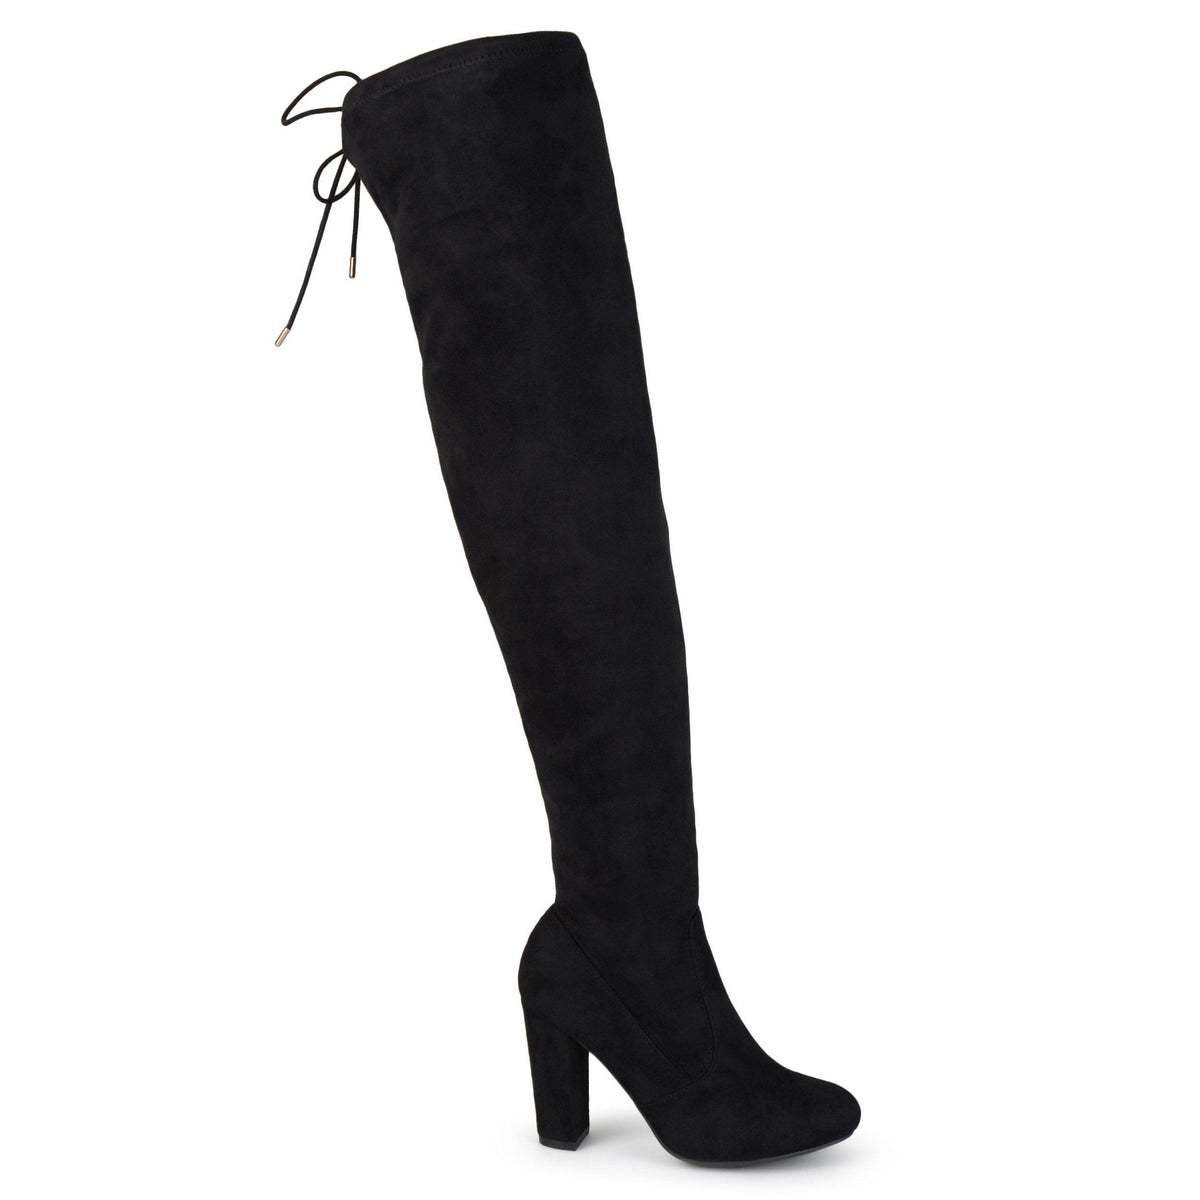 Maya Boots | Women's Over The Knee Boots | Journee Collection